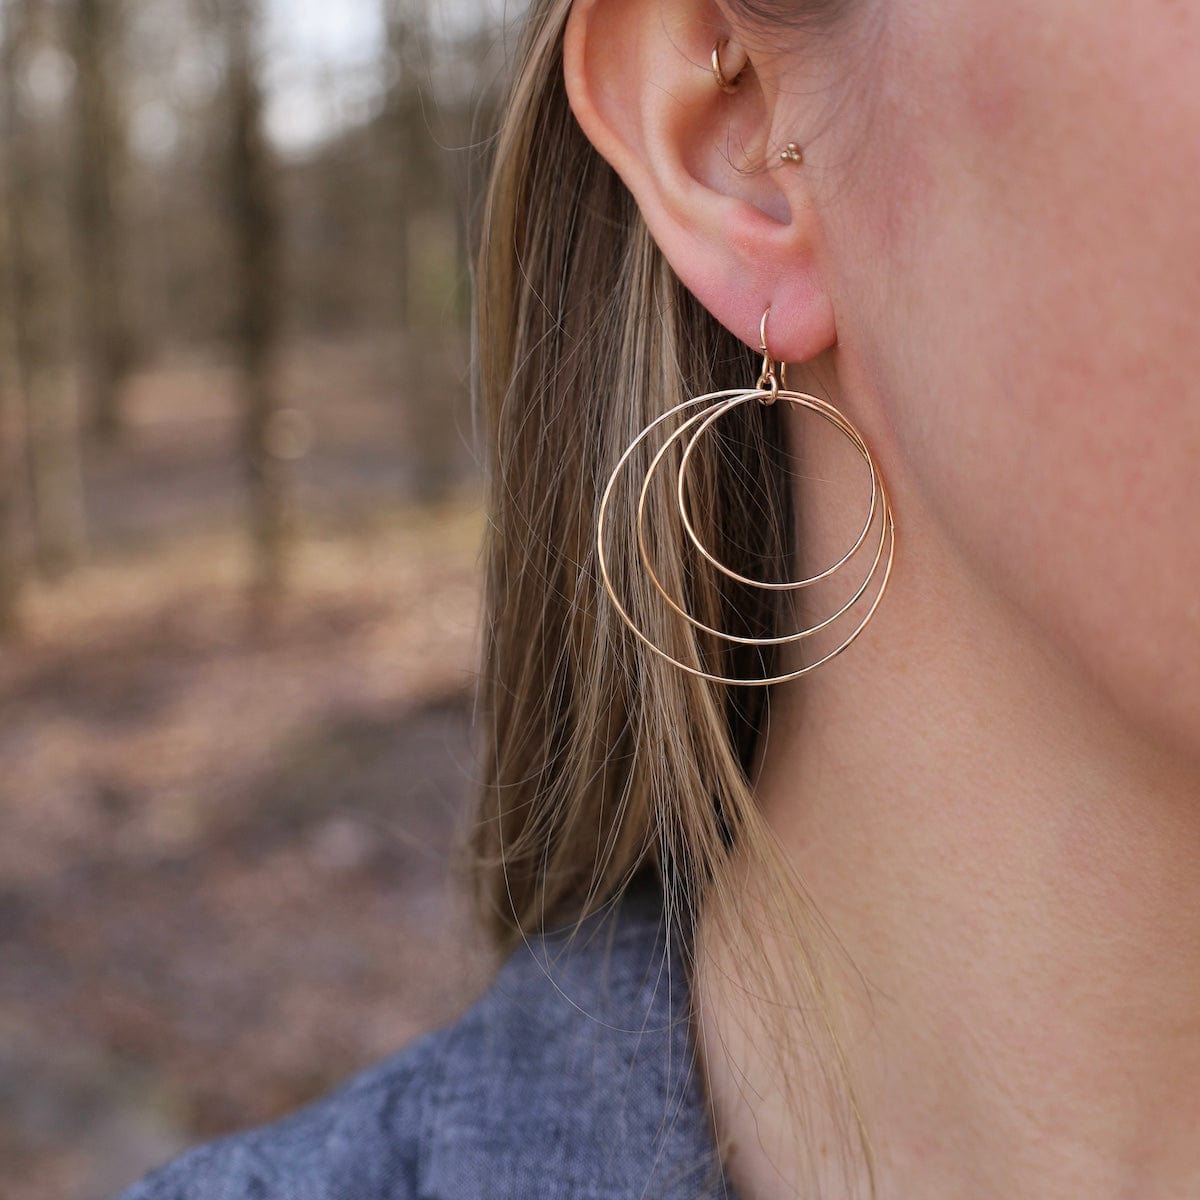 EAR-GF 3 Hammered Circle Earrings - Gold Filled